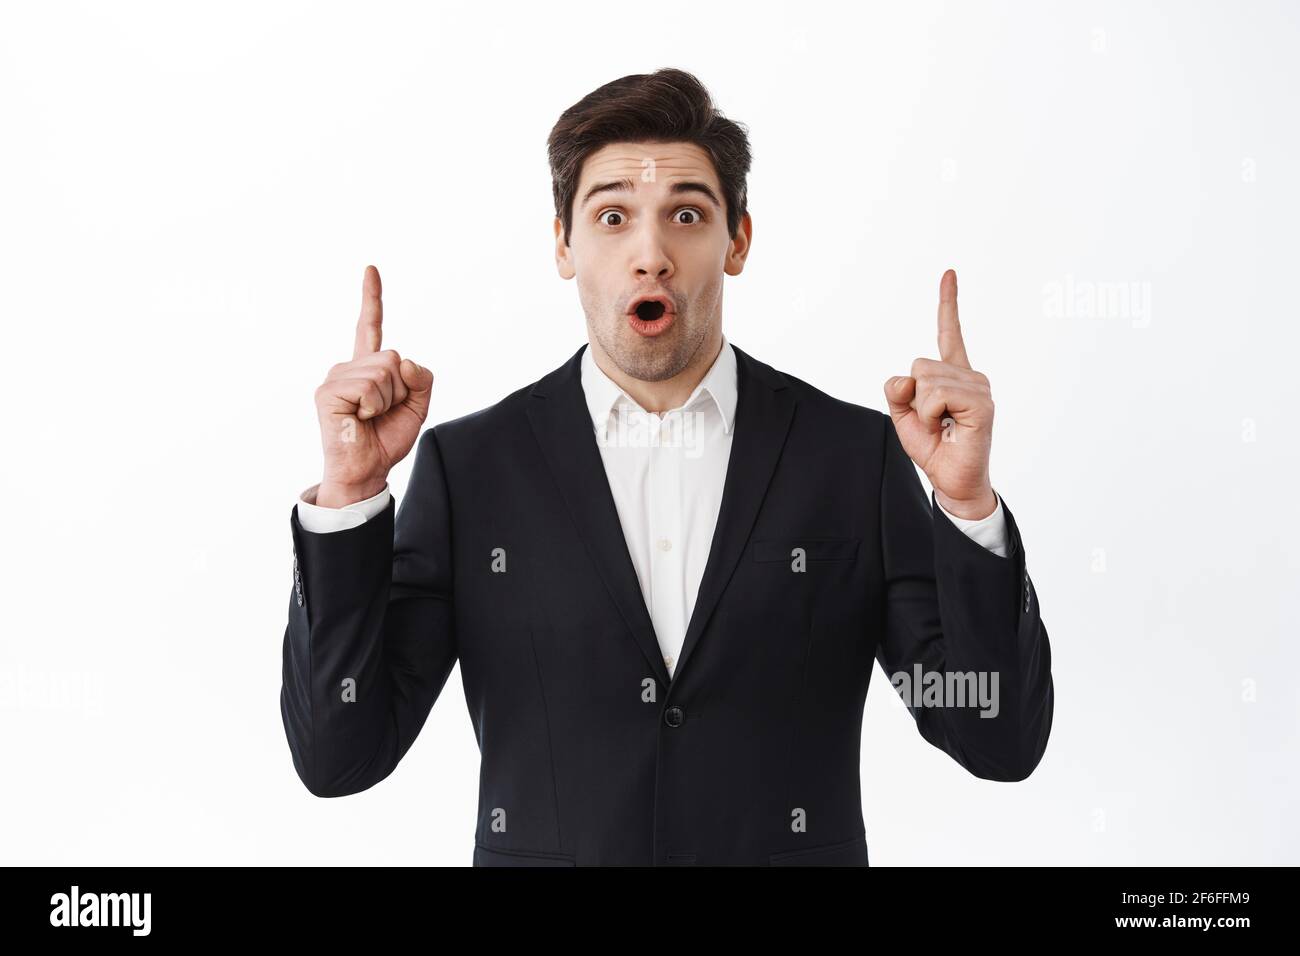 Impressed businessman, entrepreneur in black suit gasping, say wow and point up at copyspace, showing top advertisement, white background Stock Photo